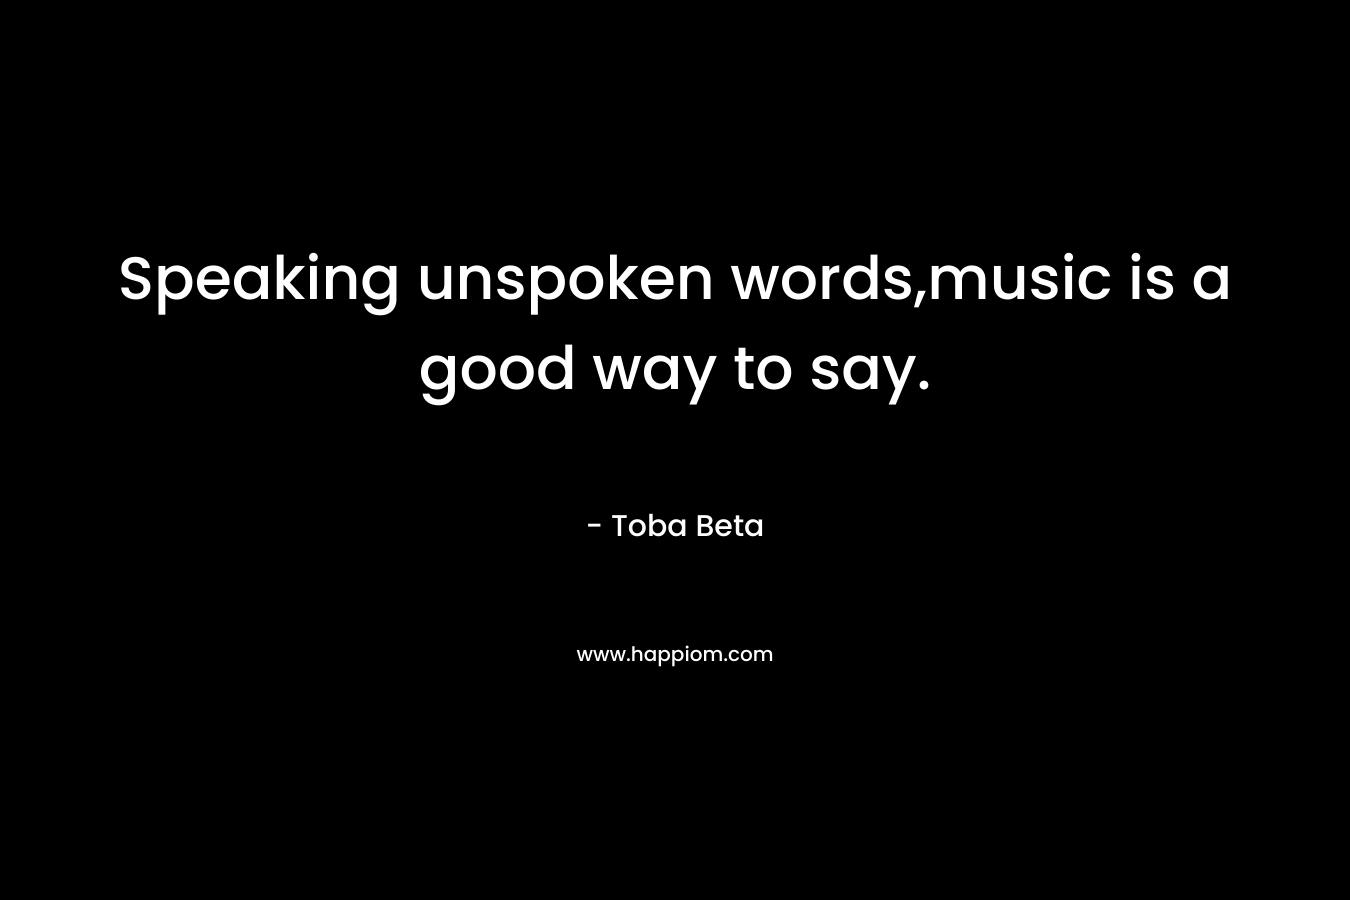 Speaking unspoken words,music is a good way to say.